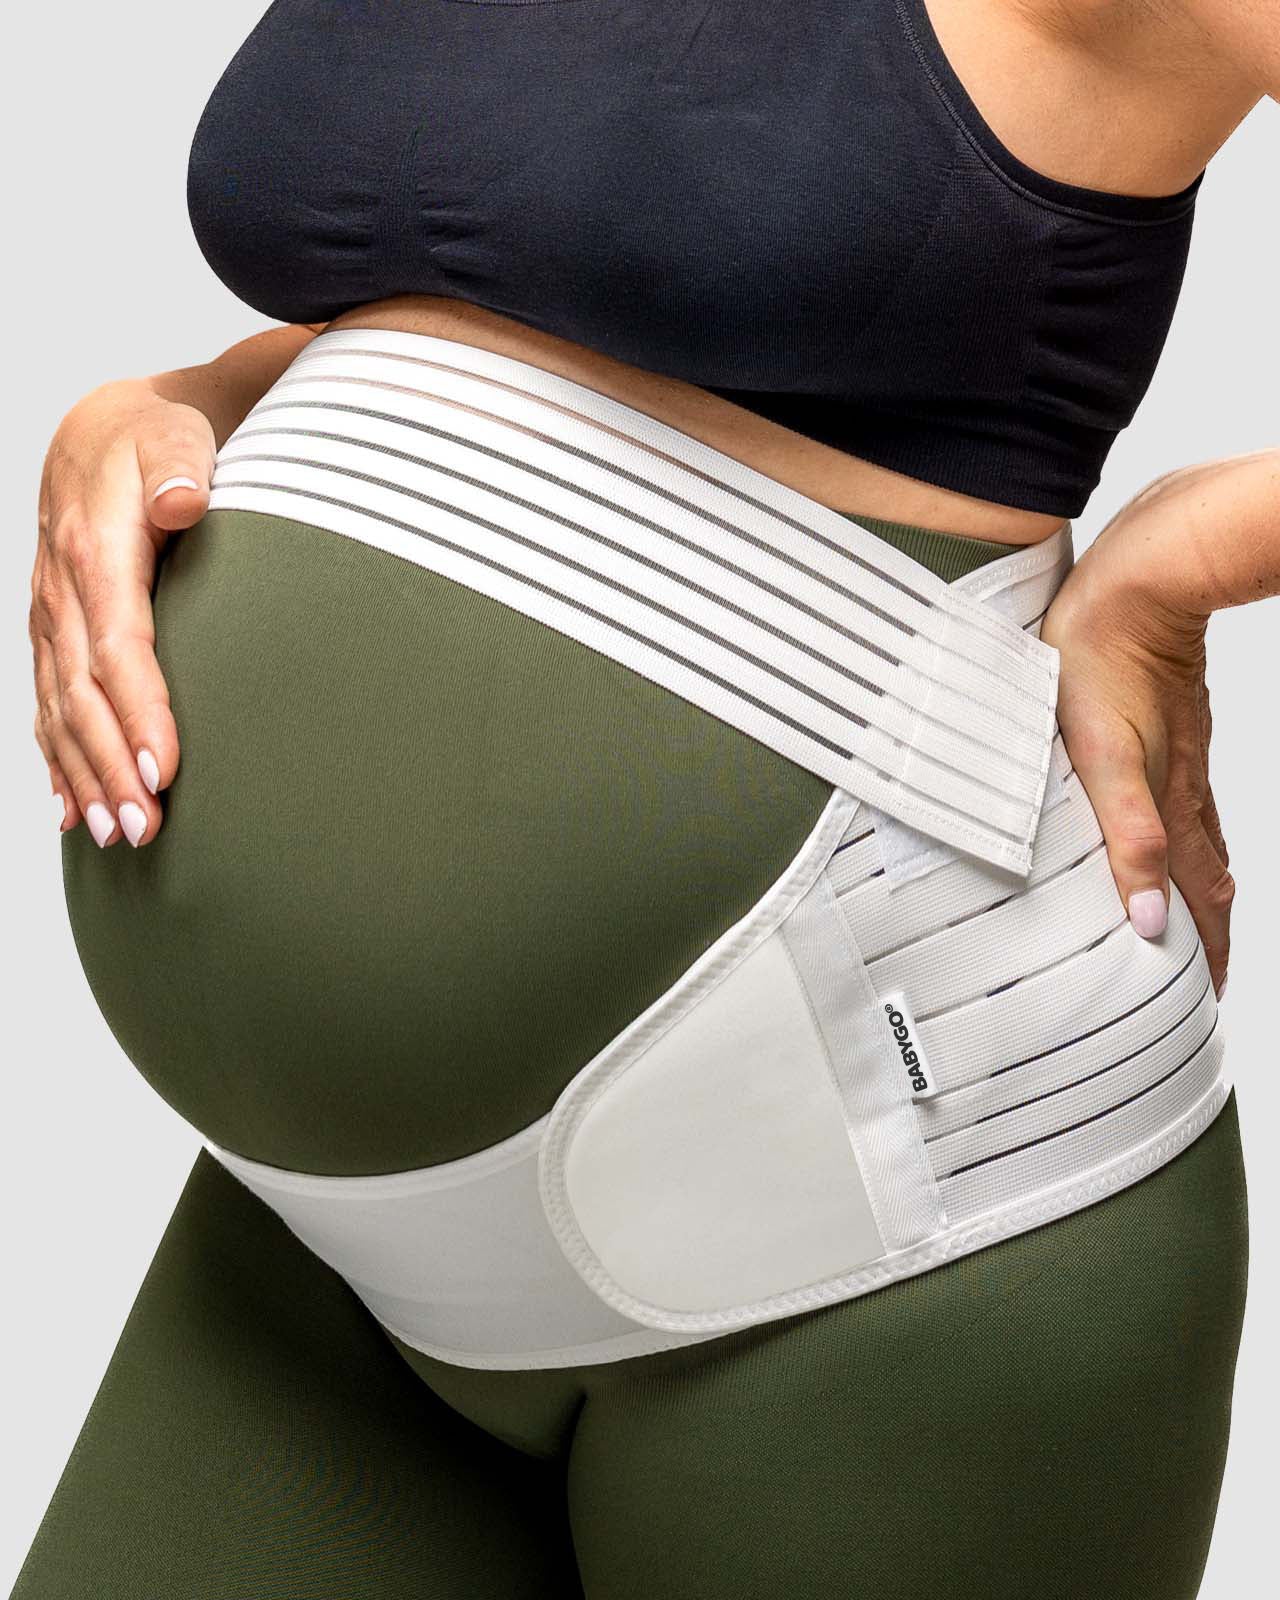 pregnant woman wearing support belt